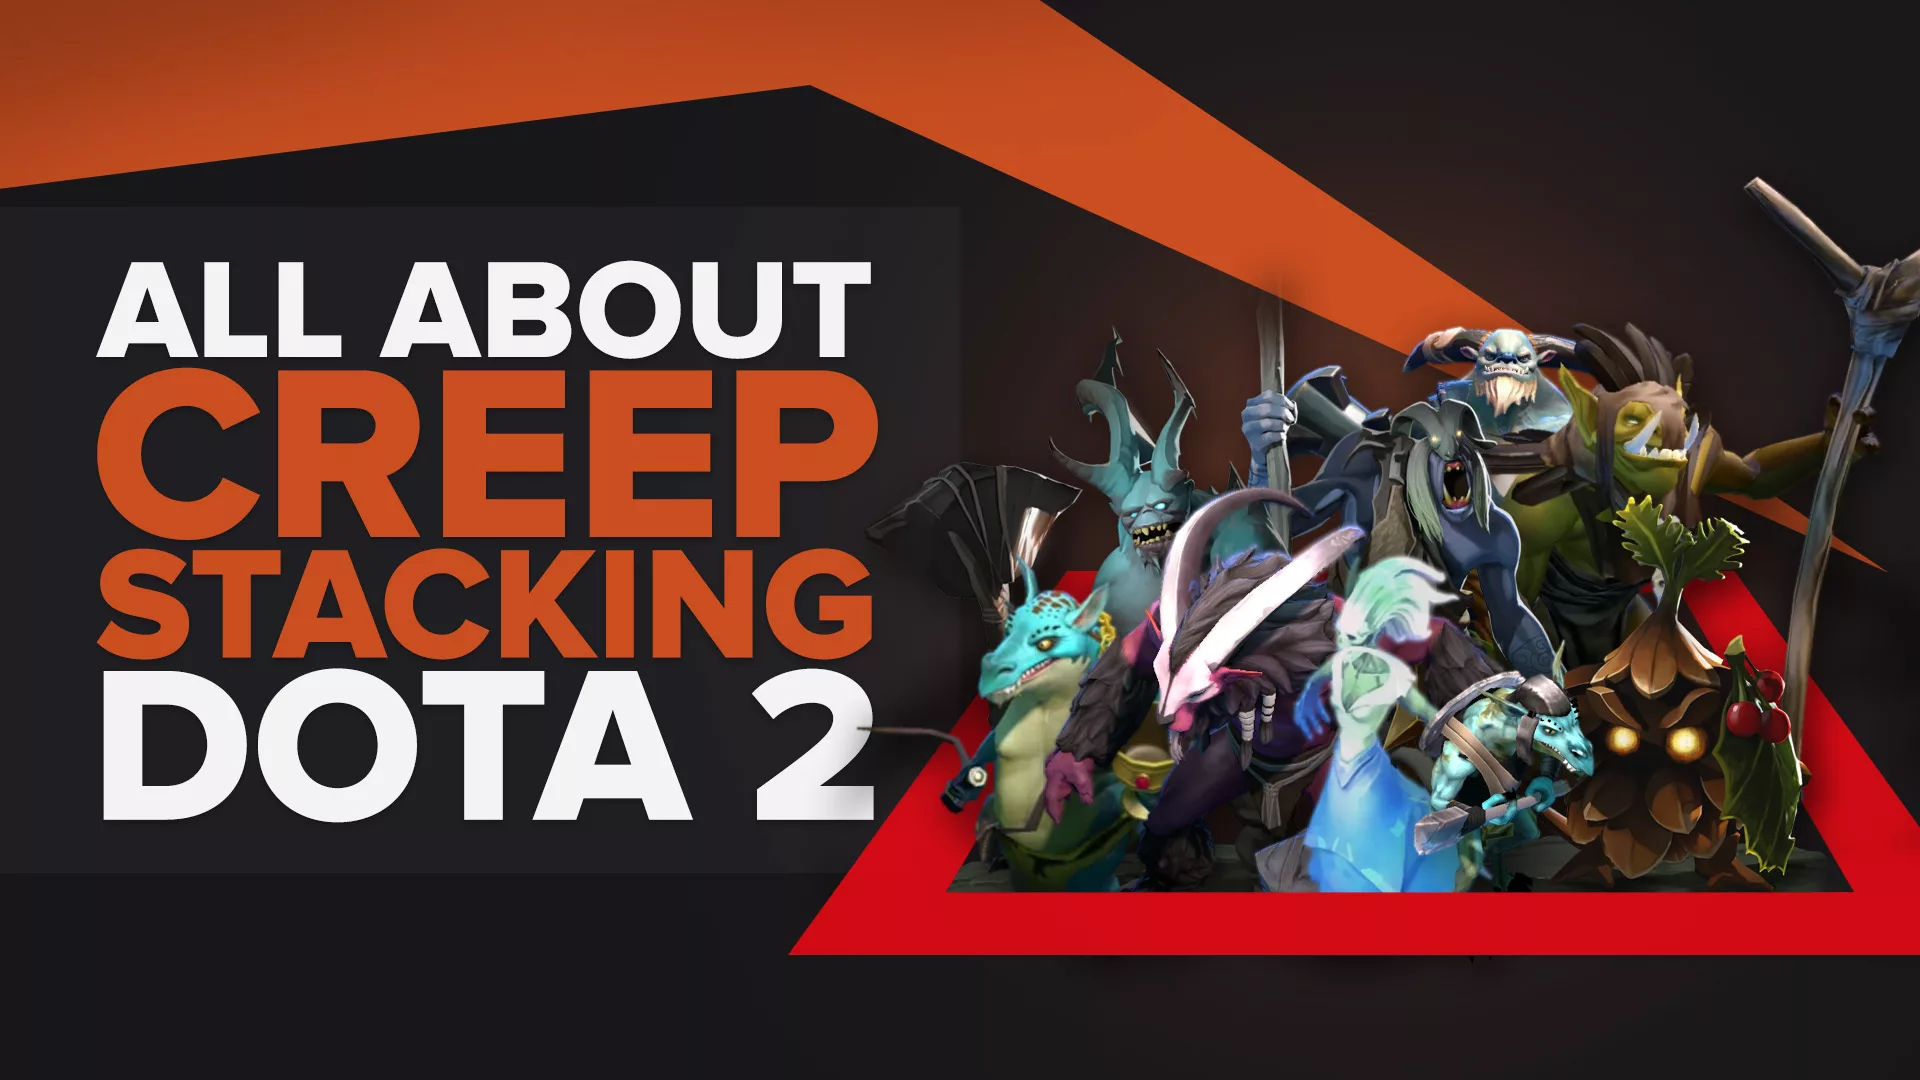 All You Need To Know About Stacking in Dota 2